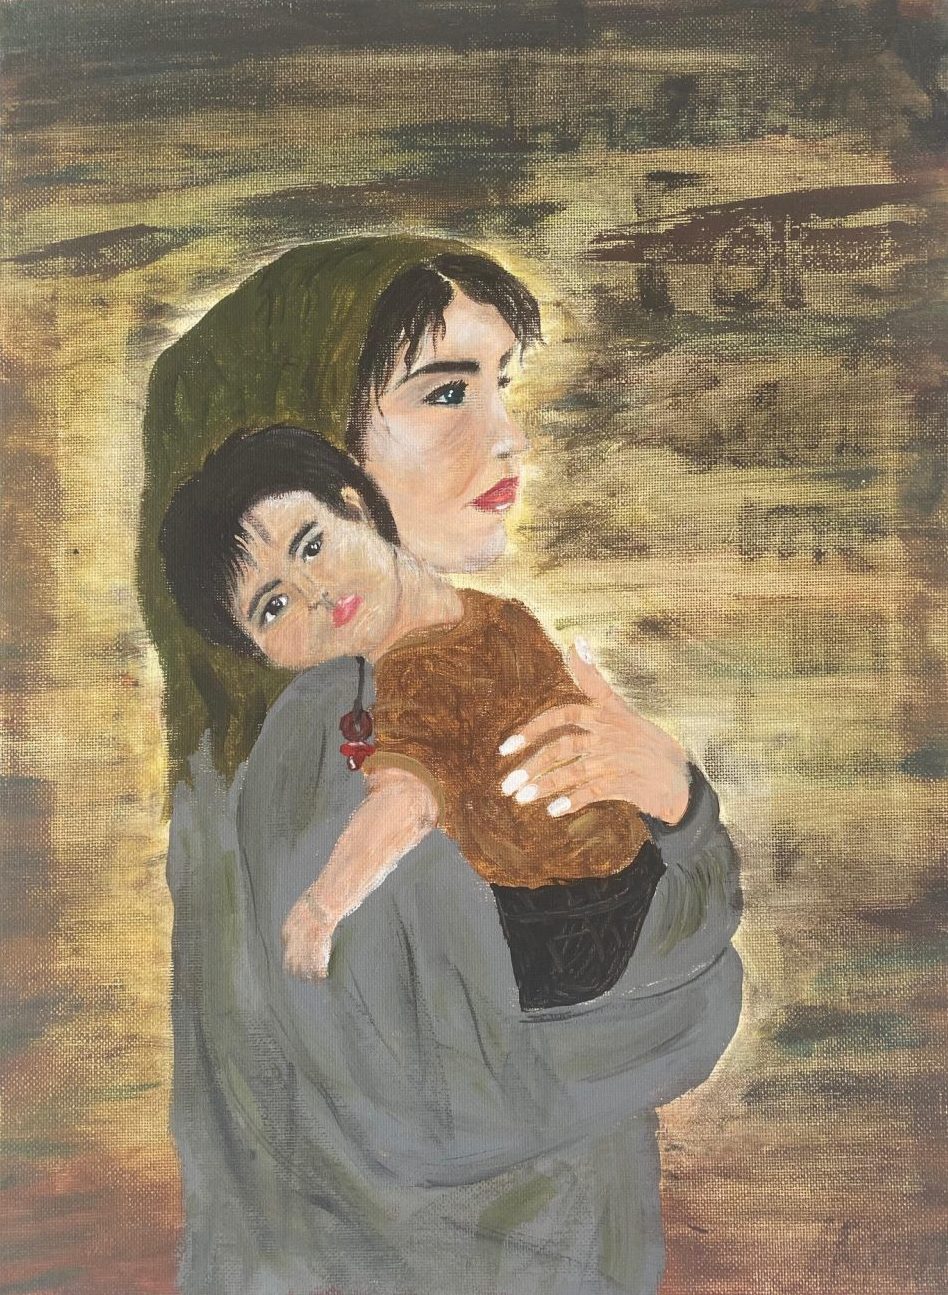 a painting of a woman with pale skin and dark hair looks to the side. She is wearing a head scarf and is holding her toddler who is looking at the viewer